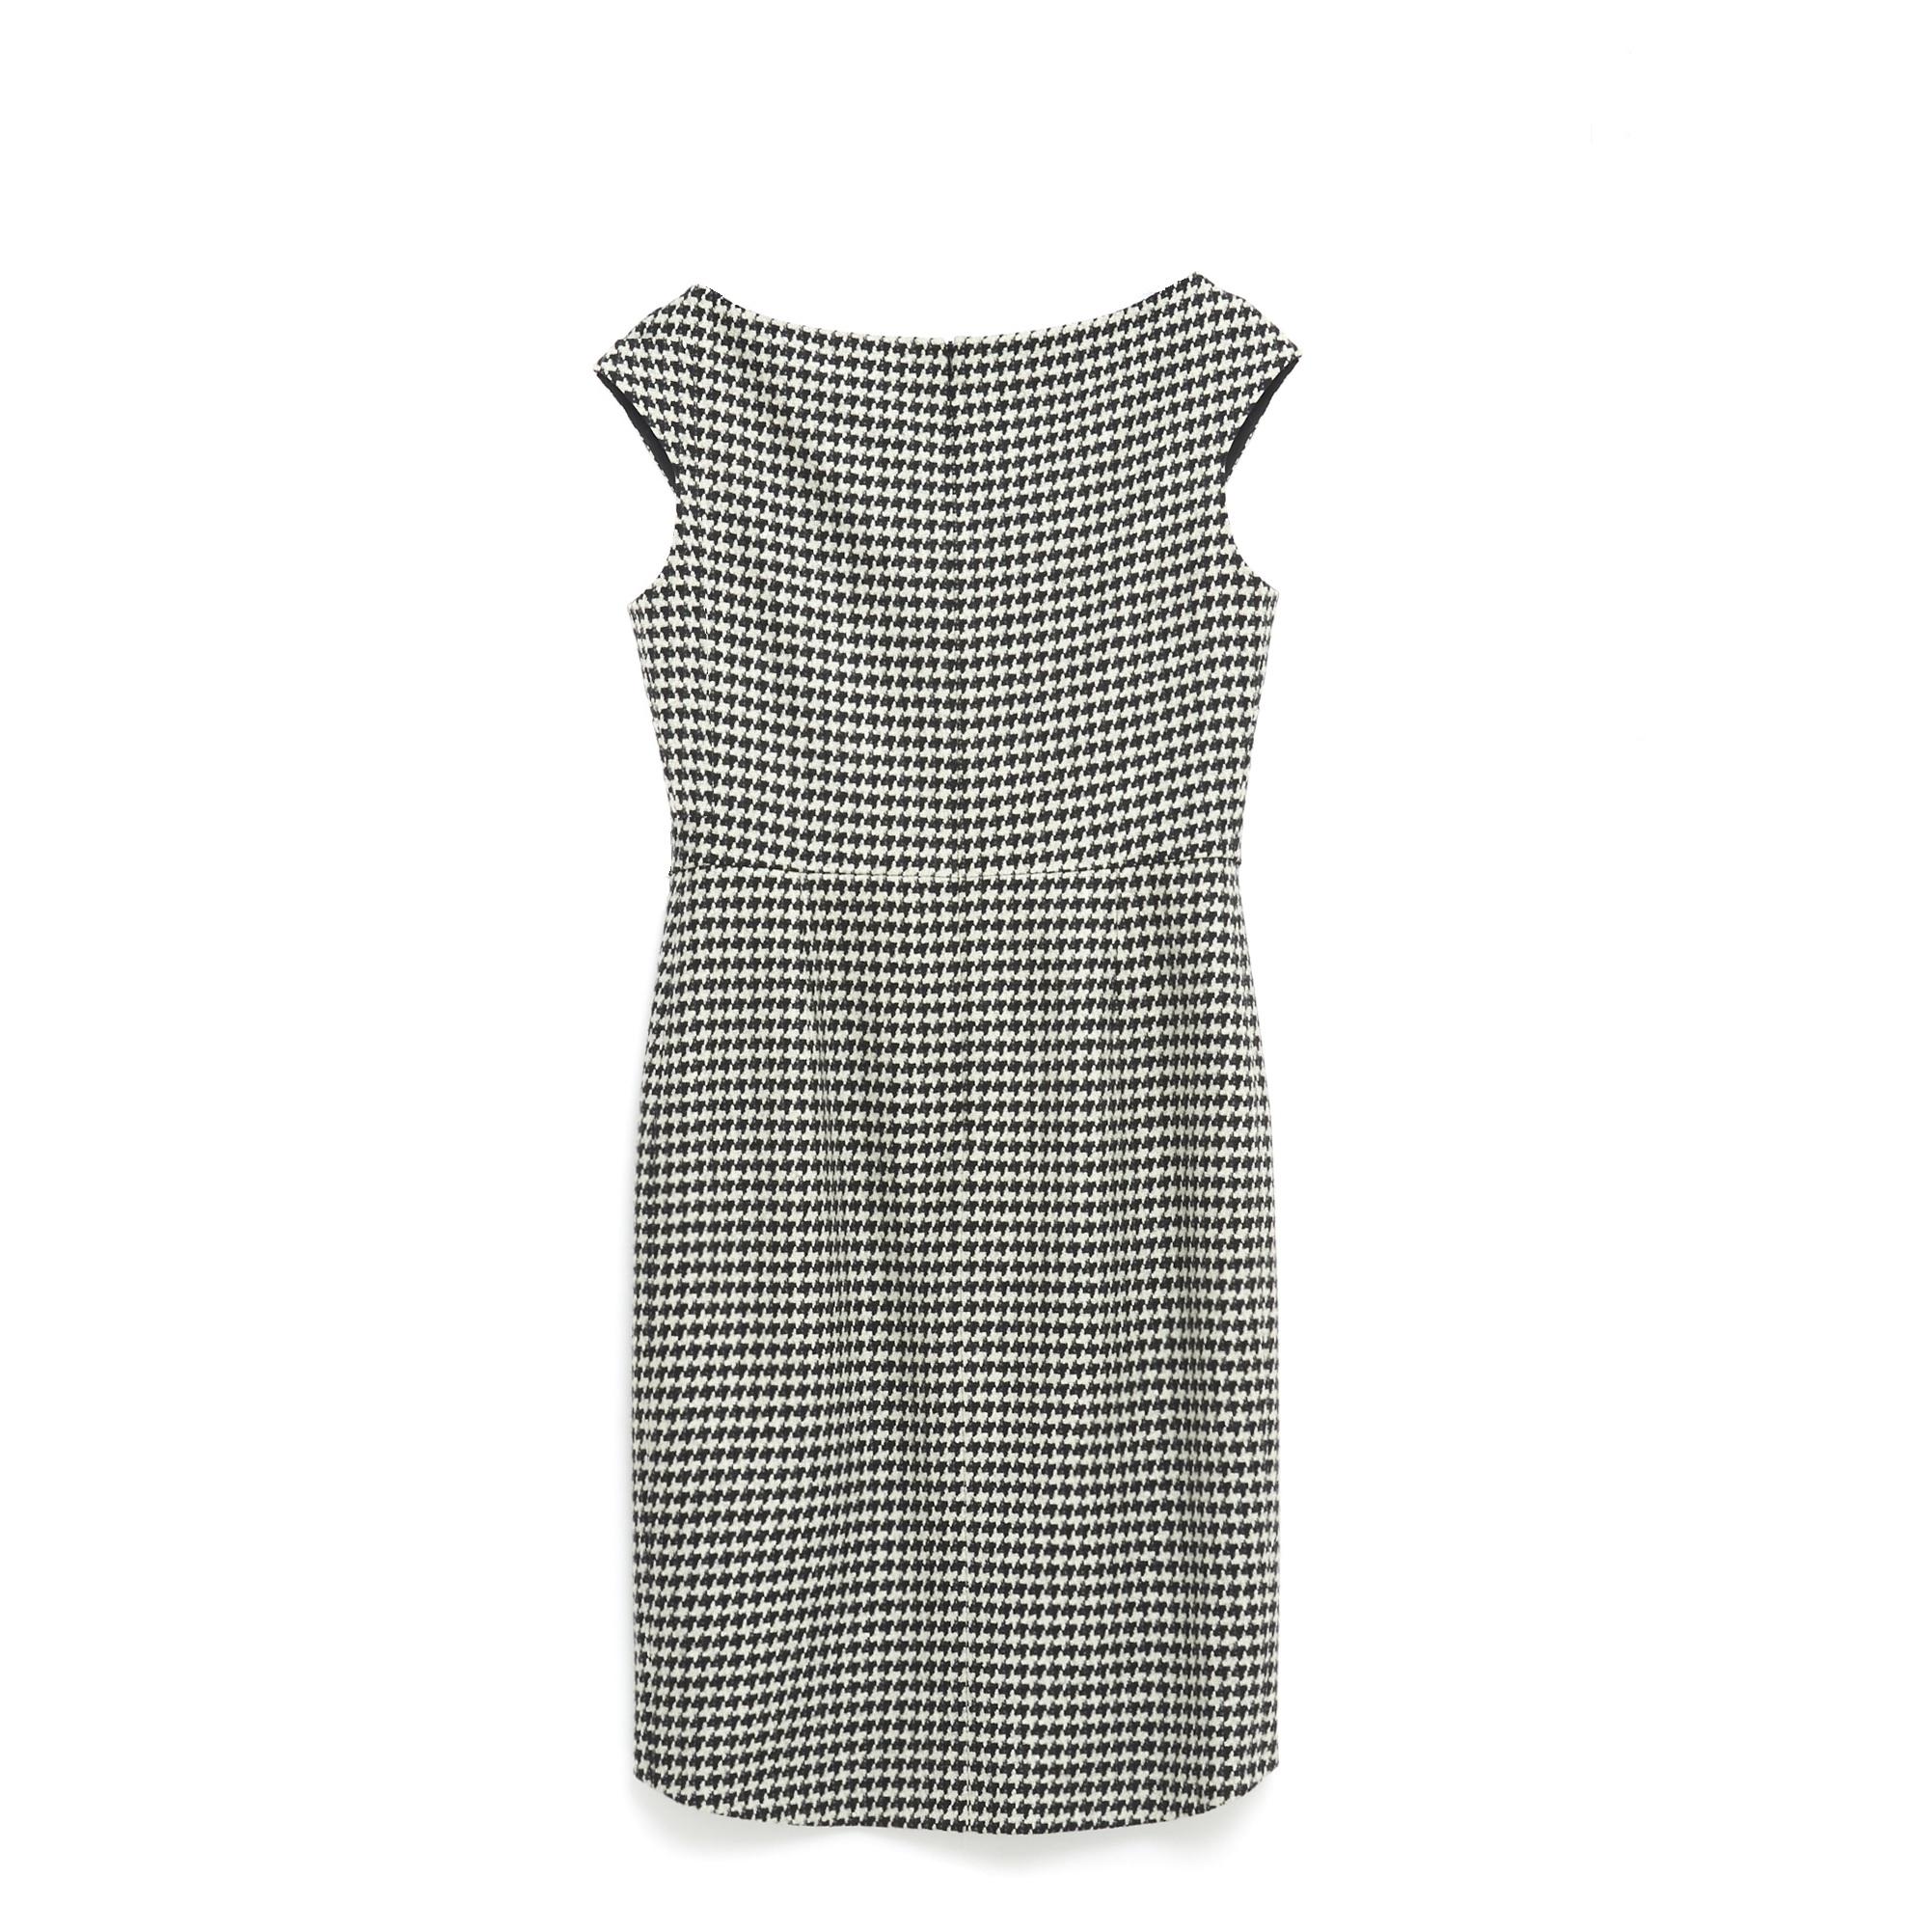 Christian Dior dress from the Fall Winter 2013 collection by Raf Simons in (thick) wool and silk cloth with black and white houndstooth pattern, wide V neckline in front, sleeveless, extended length in the back, slightly tightened waist, black silk